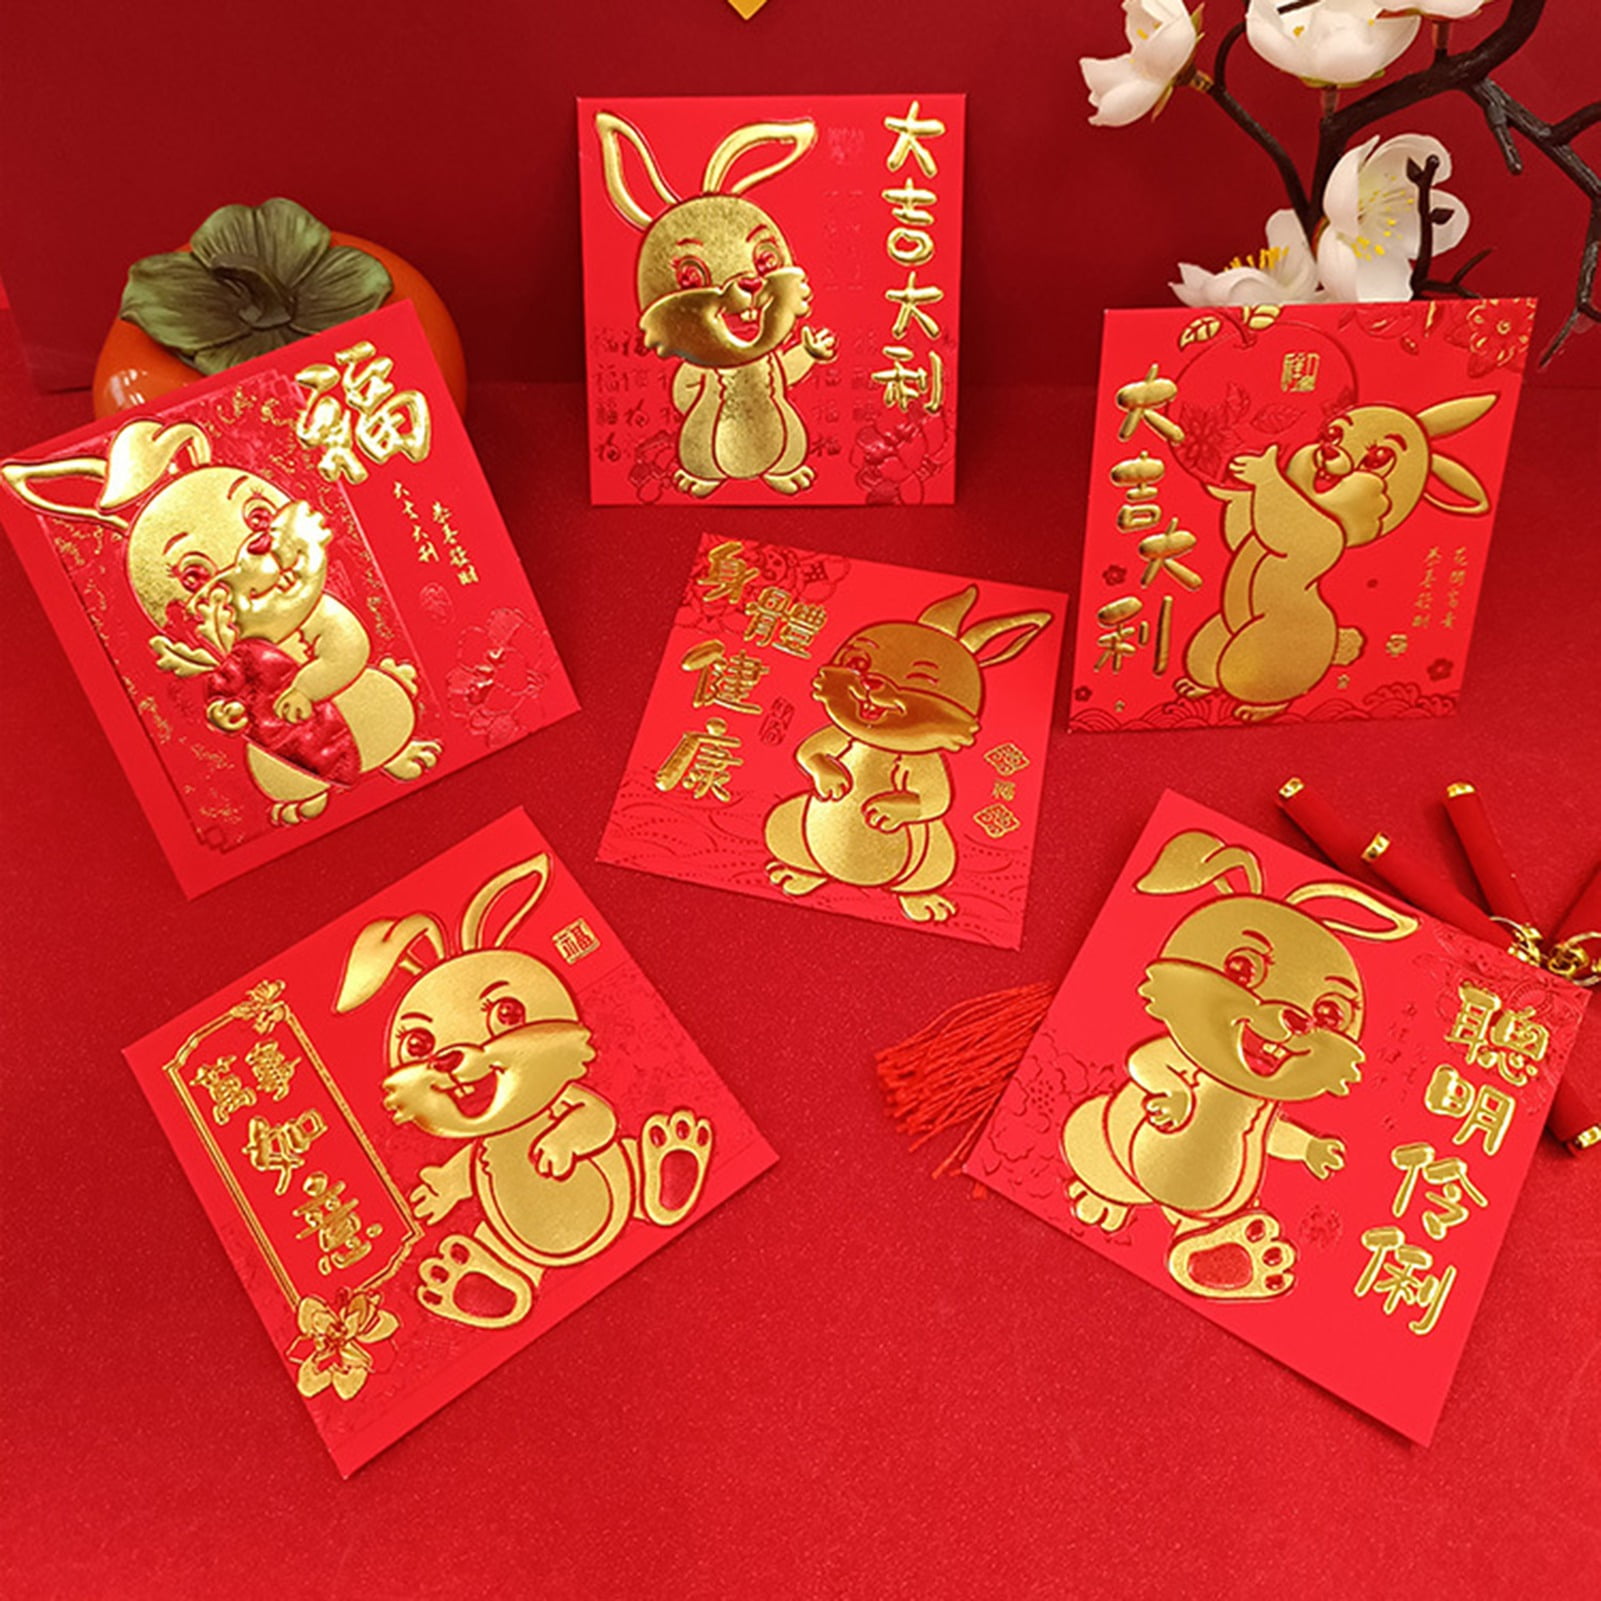 2023 Chinese Rabbit Year Red Envelopes Set of 6 Festival Cute